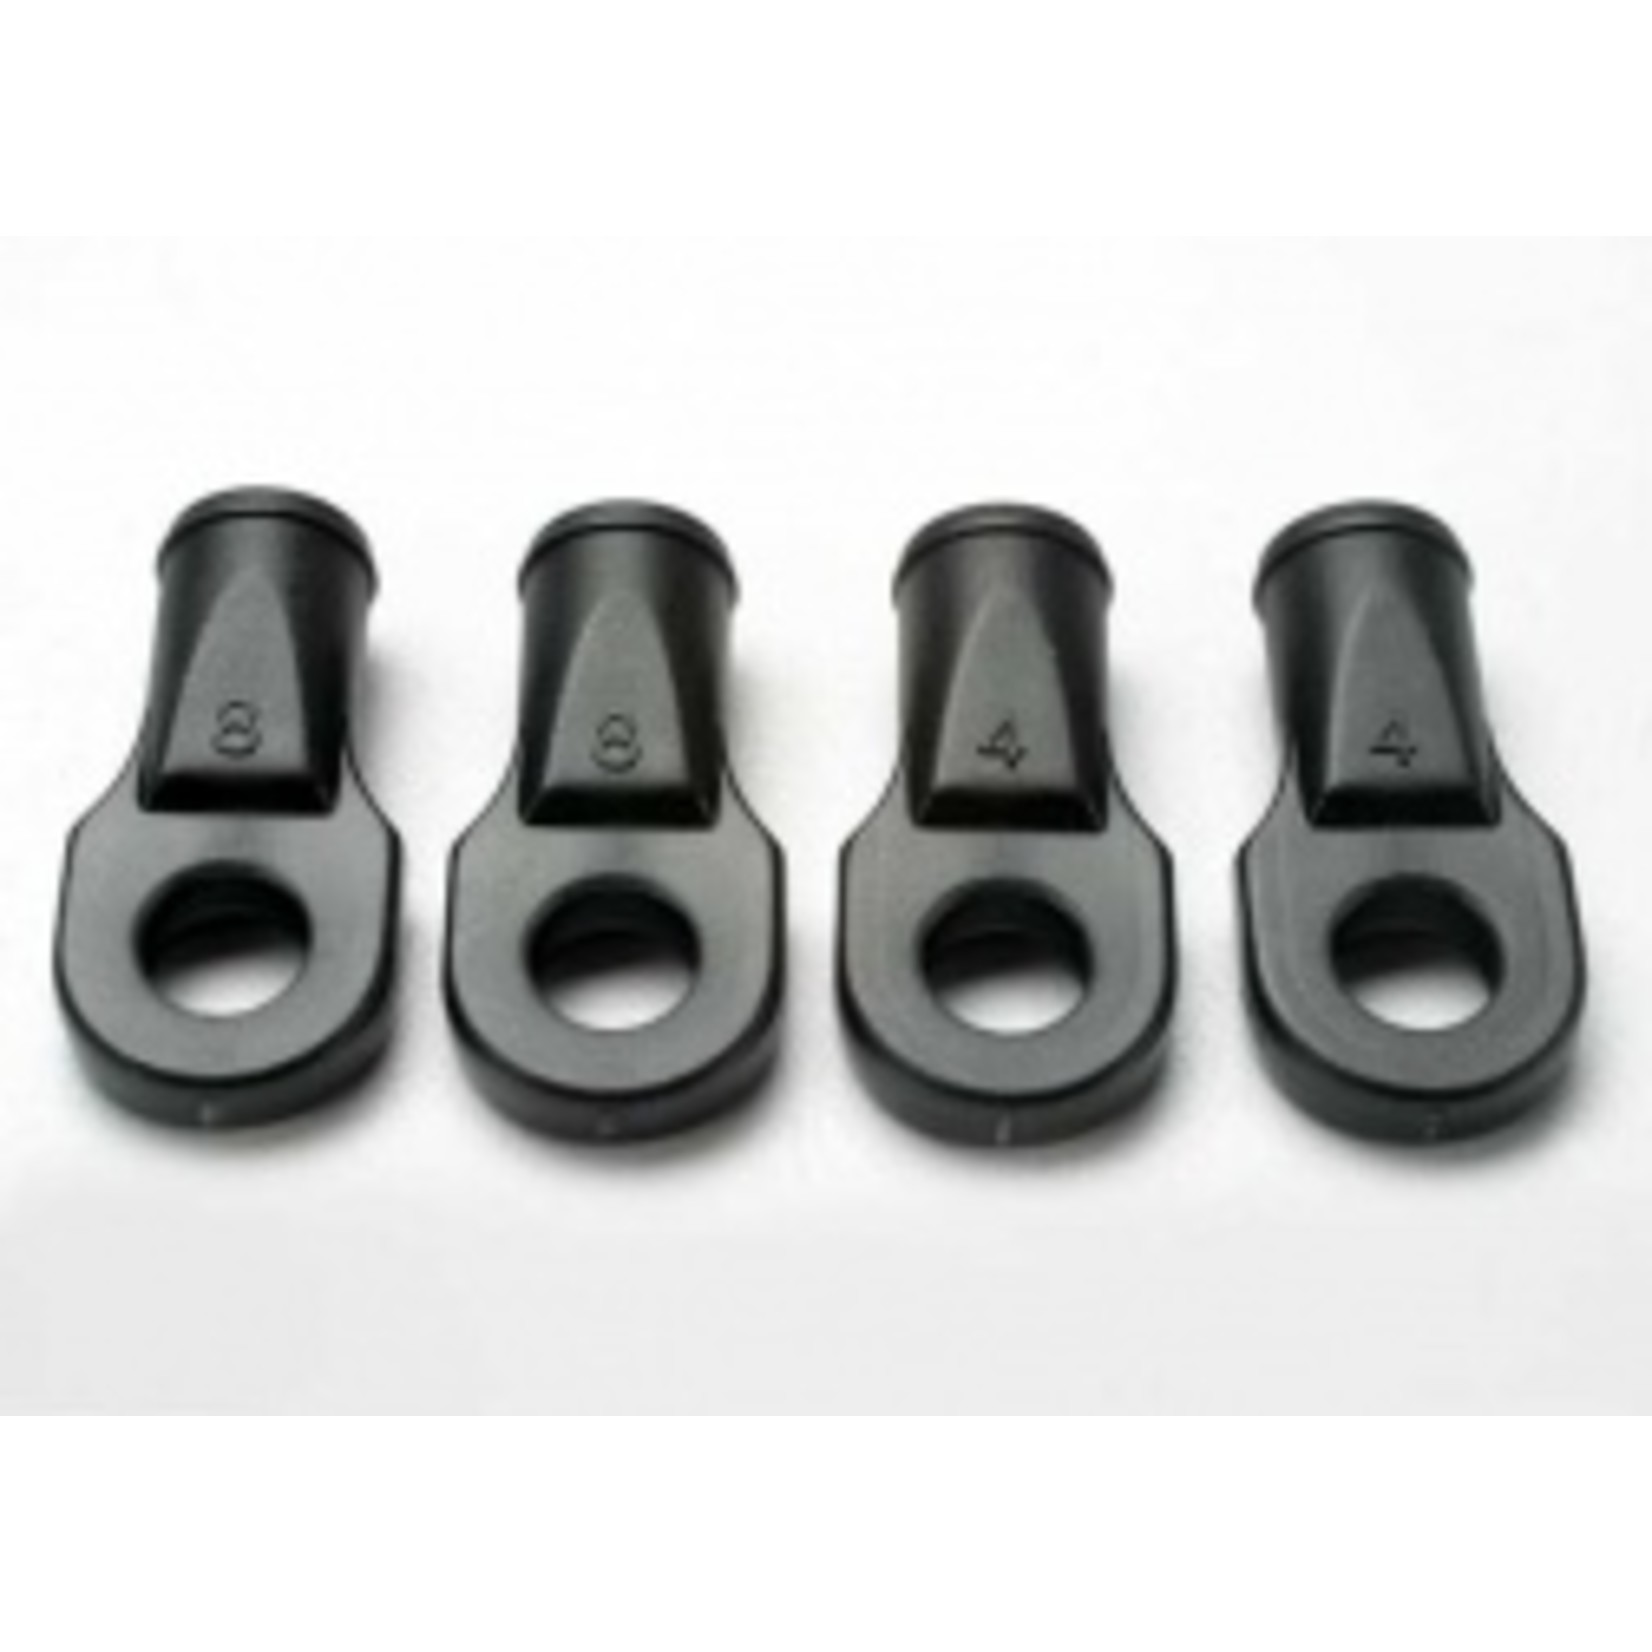 Traxxas 5348 Rod ends, Revo® (large, for rear toe link only) (4)